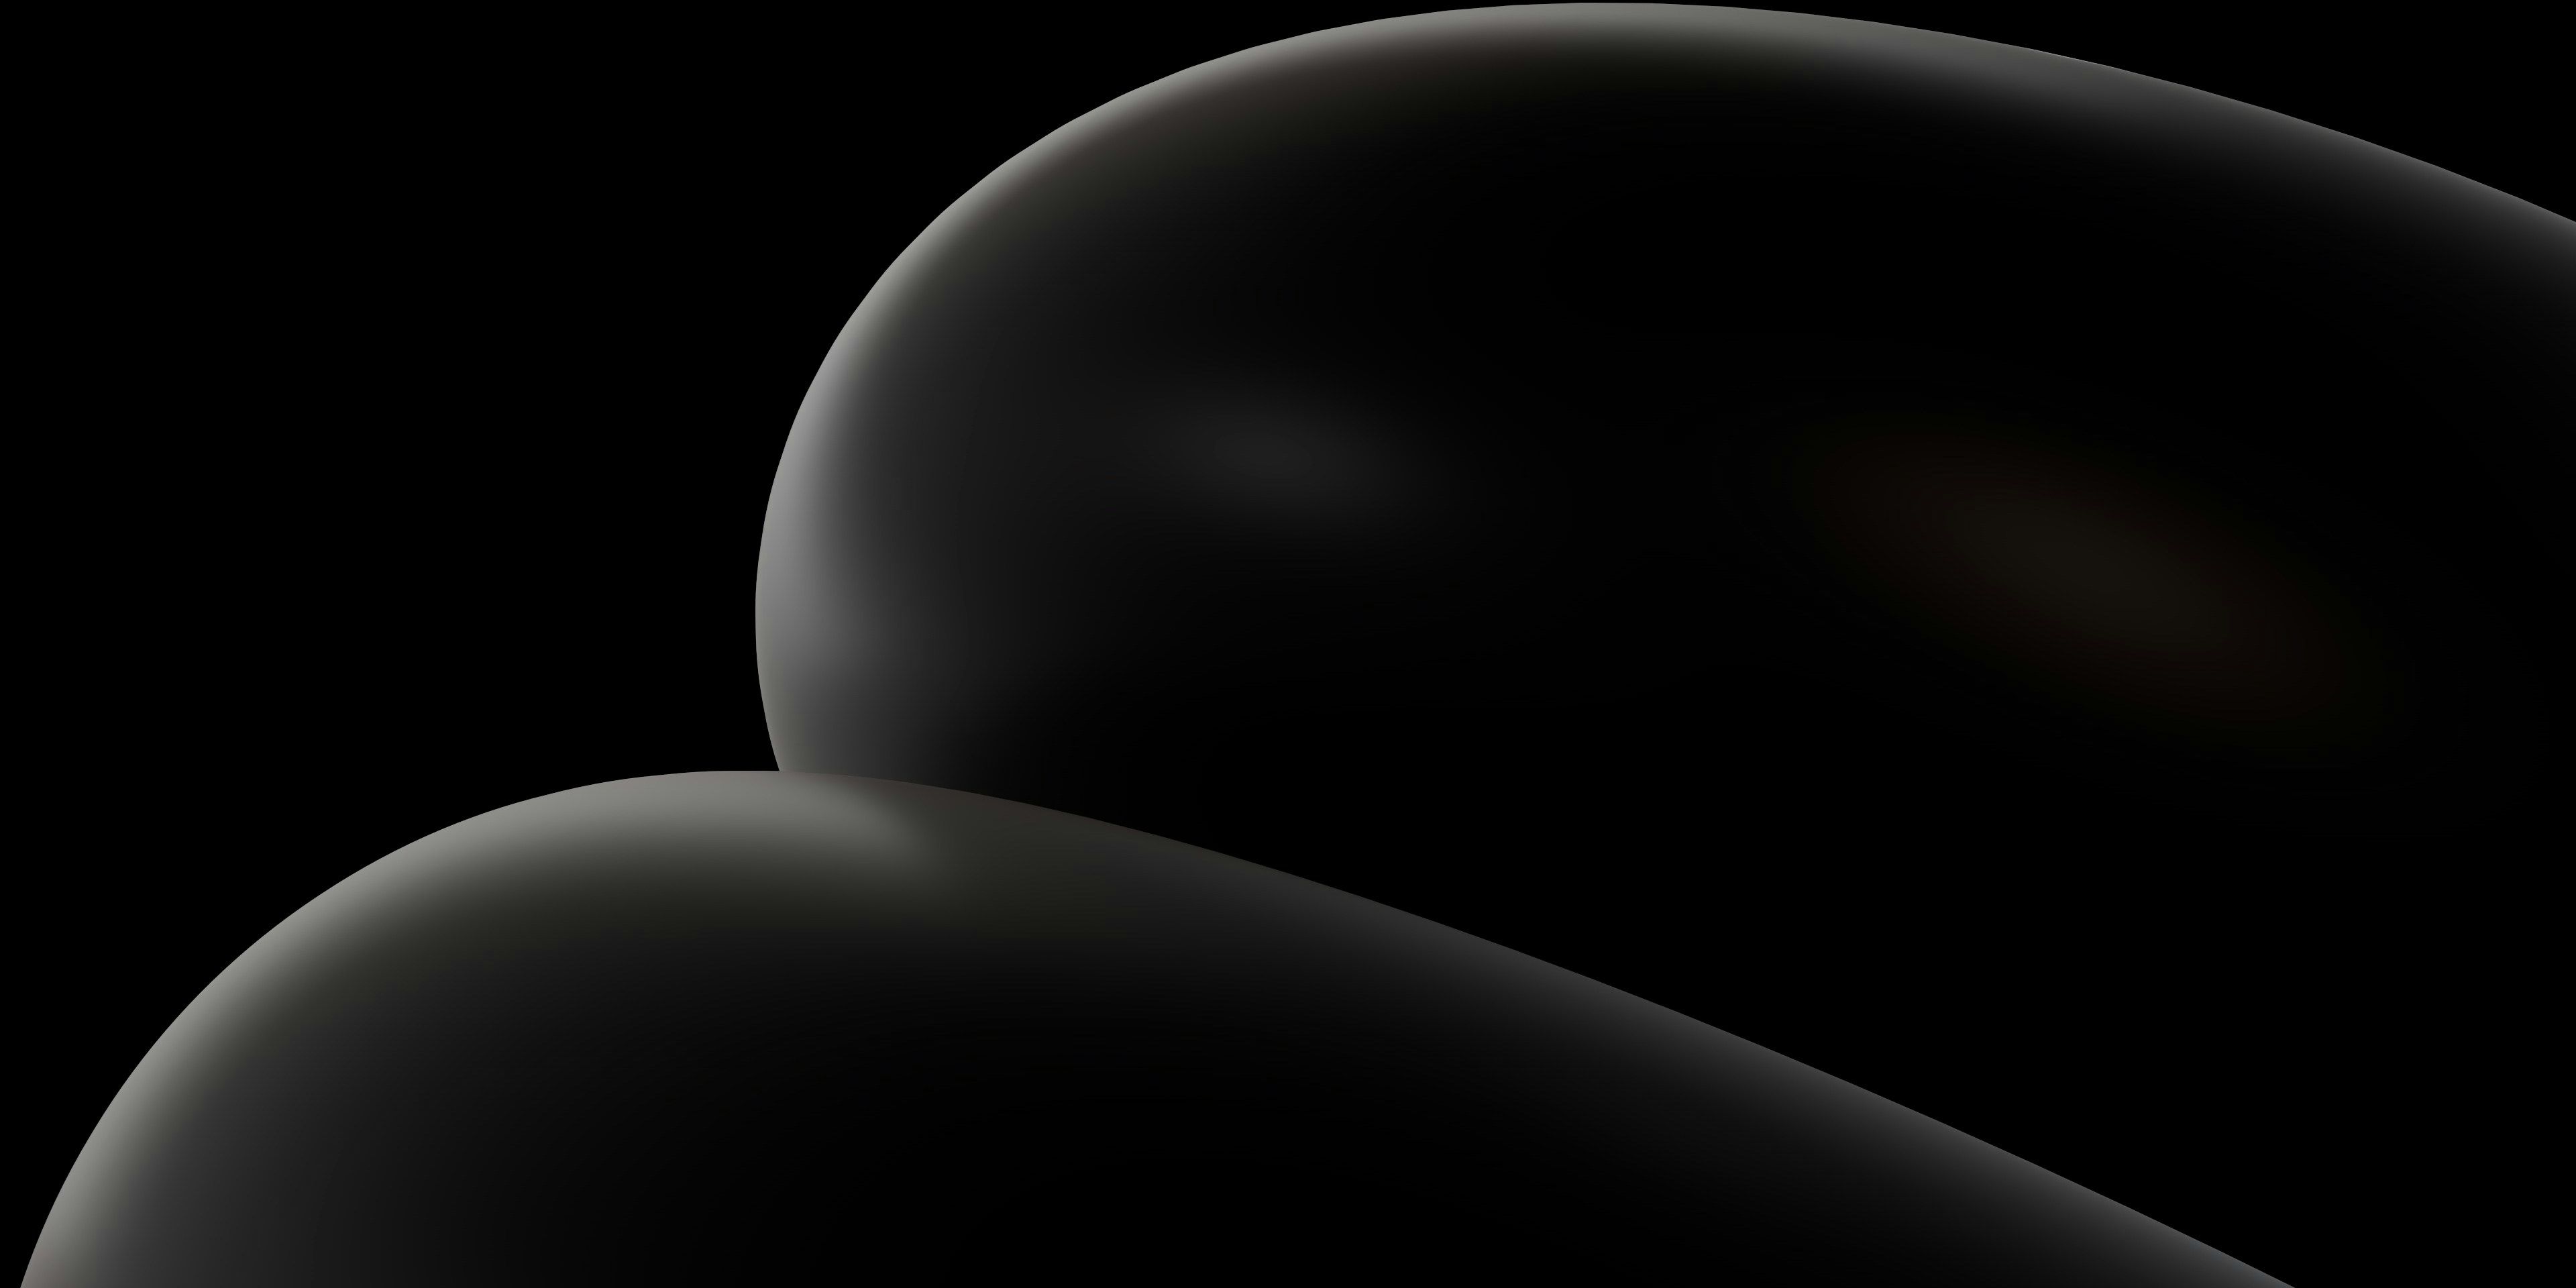 A close up of a black object on a black background .